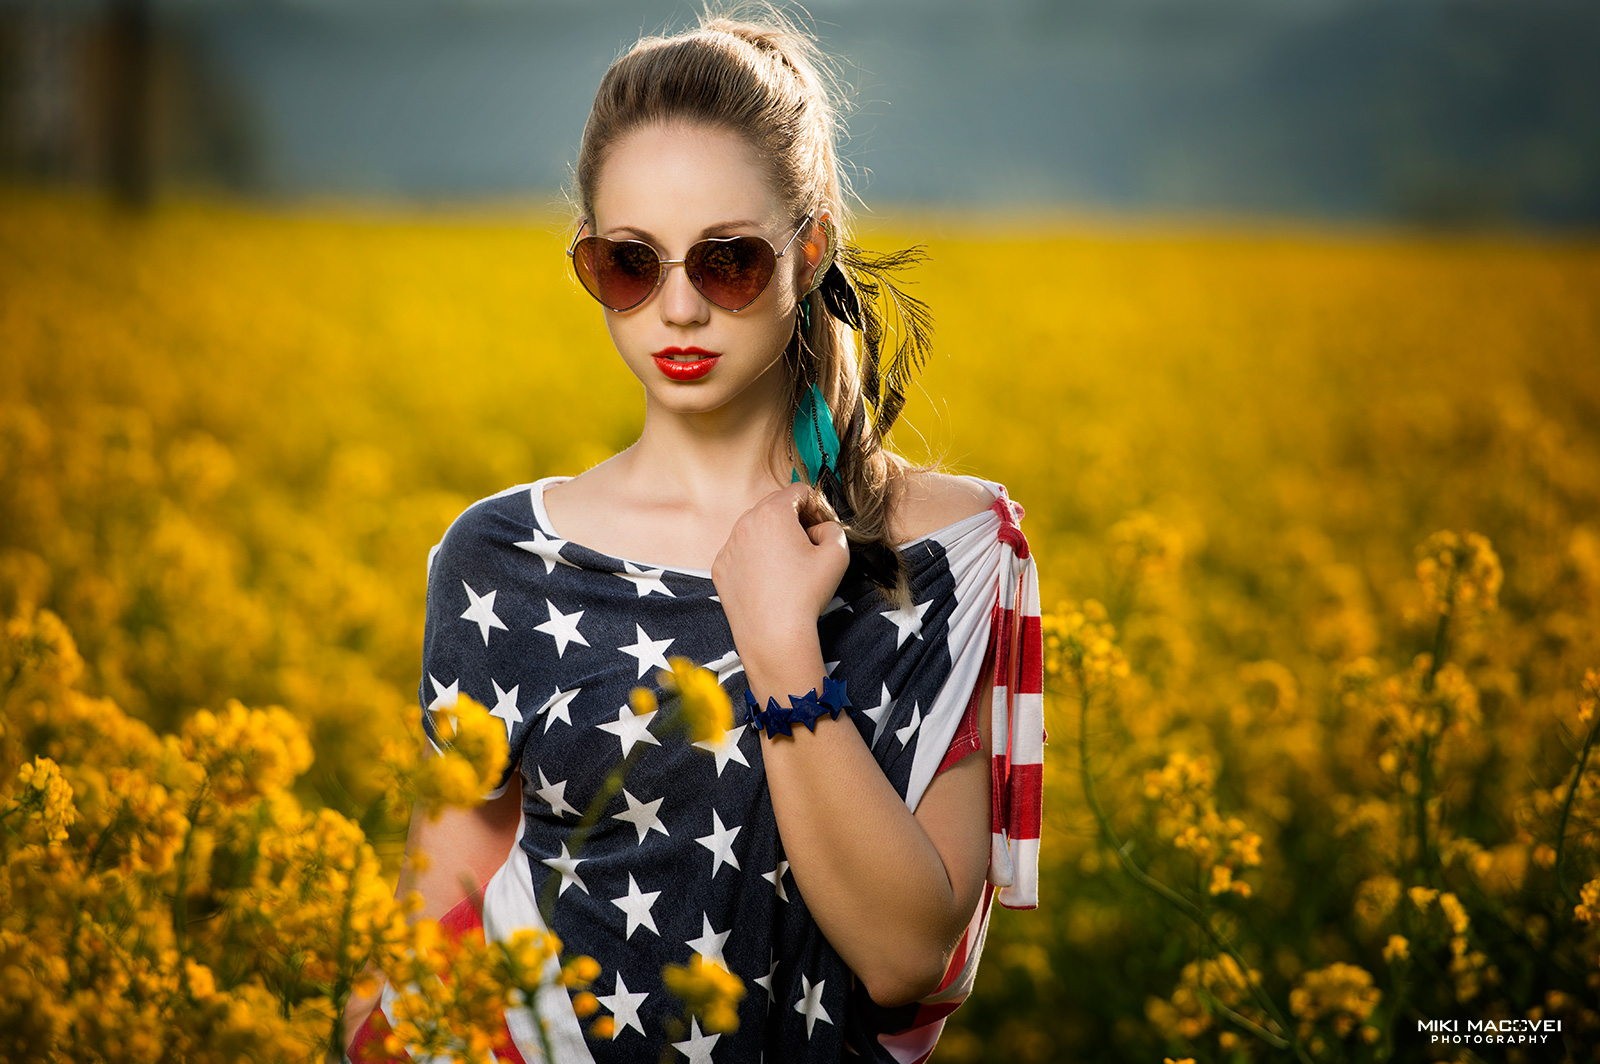 People 1600x1064 women model long hair brunette looking at viewer USA ponytail sunglasses field depth of field Miki Macovei flag women with glasses bracelets women outdoors red lipstick American flag watermarked makeup women with shades plants flowers yellow flowers outdoors heart sunglasses